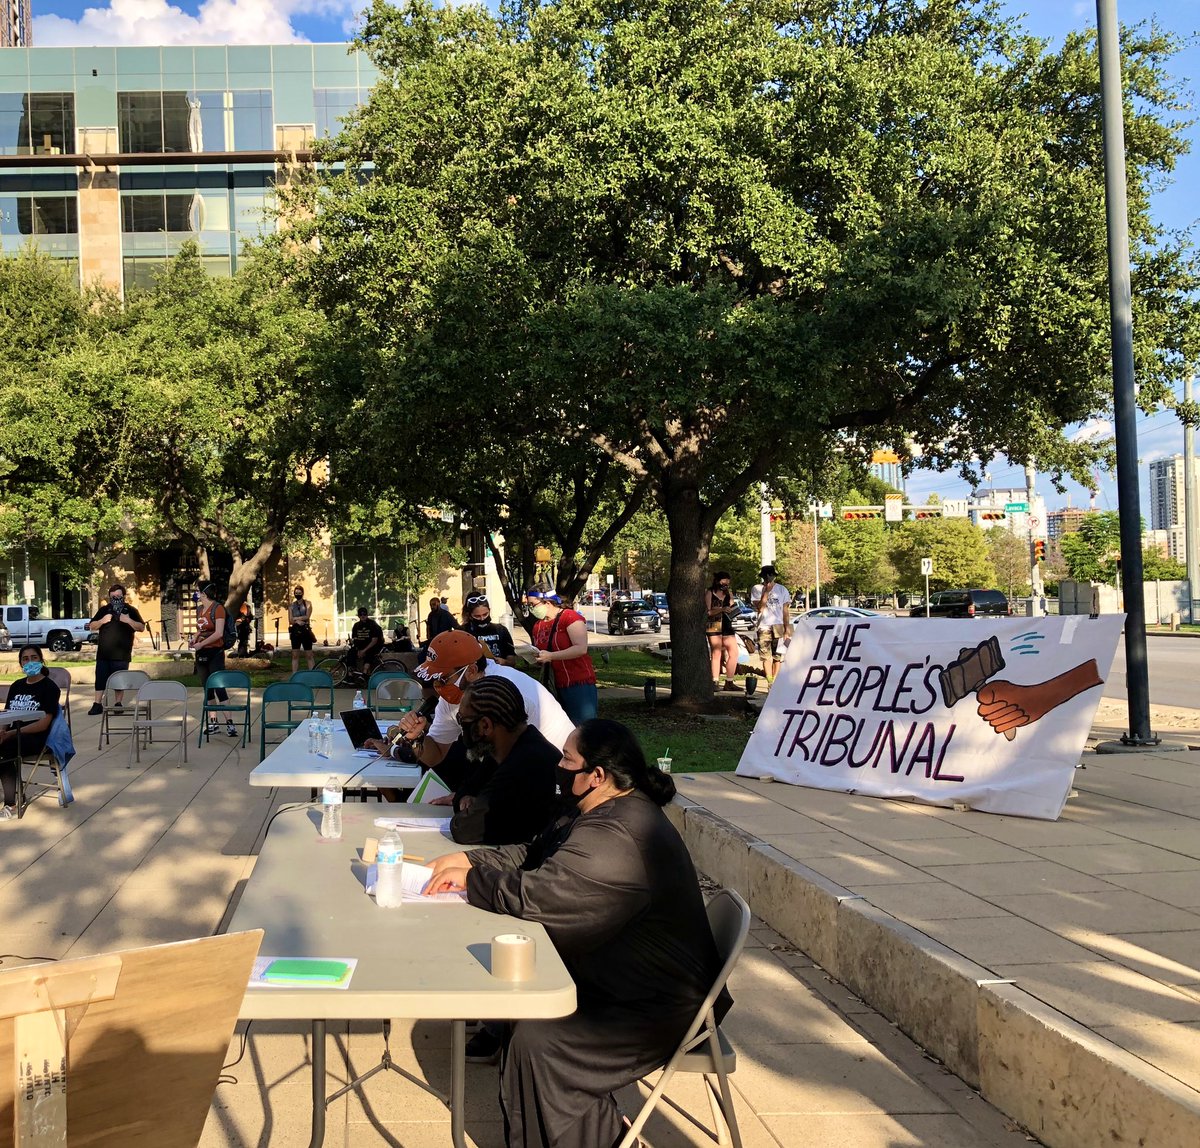 With  @Austin_DSA &  @atxliberation, we held a People's Tribunal outside City Hall.Directly impacted people gave evidence for charges of displacement, underfunding of public health, police brutality, & anti-immigrant policies & found the city guilty.  https://www.facebook.com/watch/live/?v=320098189143132&ref=watch_permalink 8/x